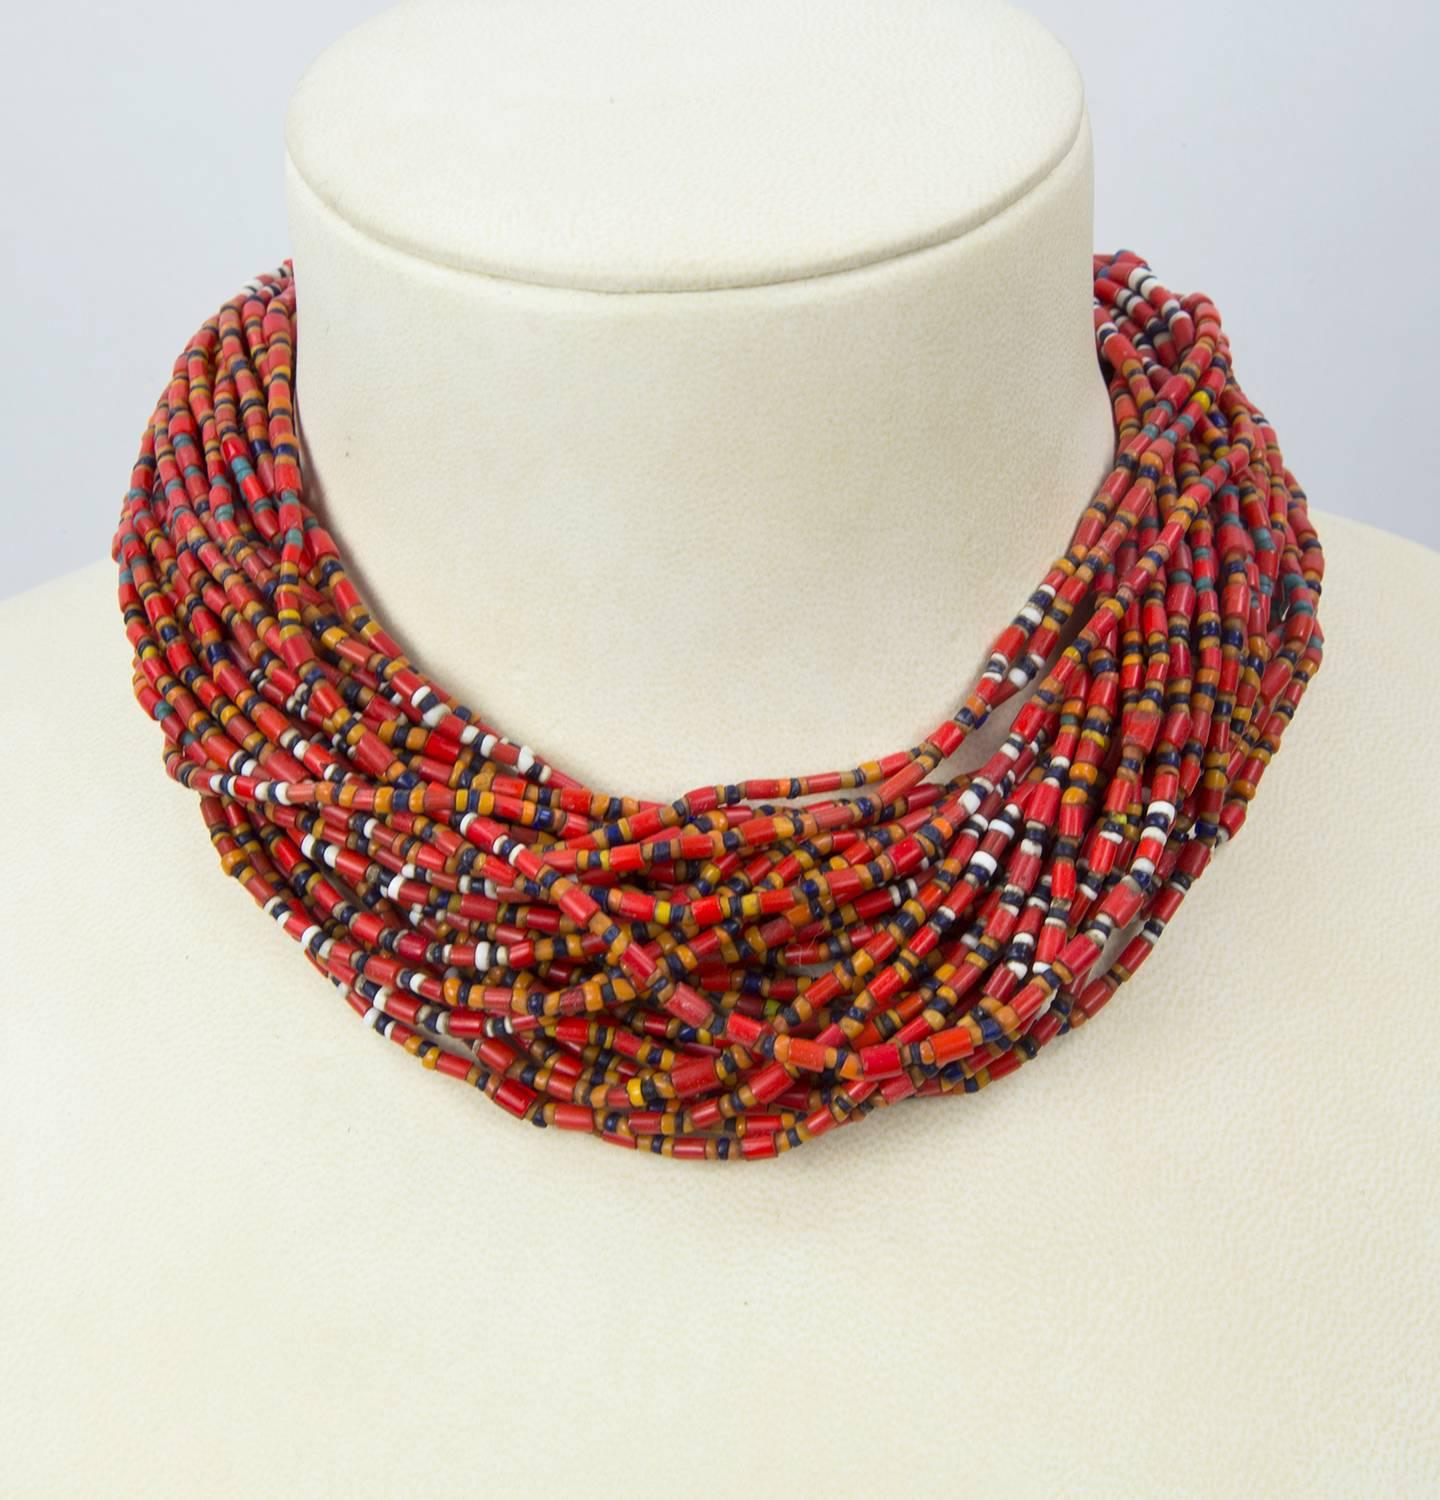 Sensational Necklace in its 36-strand display of multi Tribal Glass Beads; These high-grade beads measure approx. 5mm x 3.5mm; The strands meet at handmade triangular cones, interwoven with the glass beads and ending with a circular Silver coin